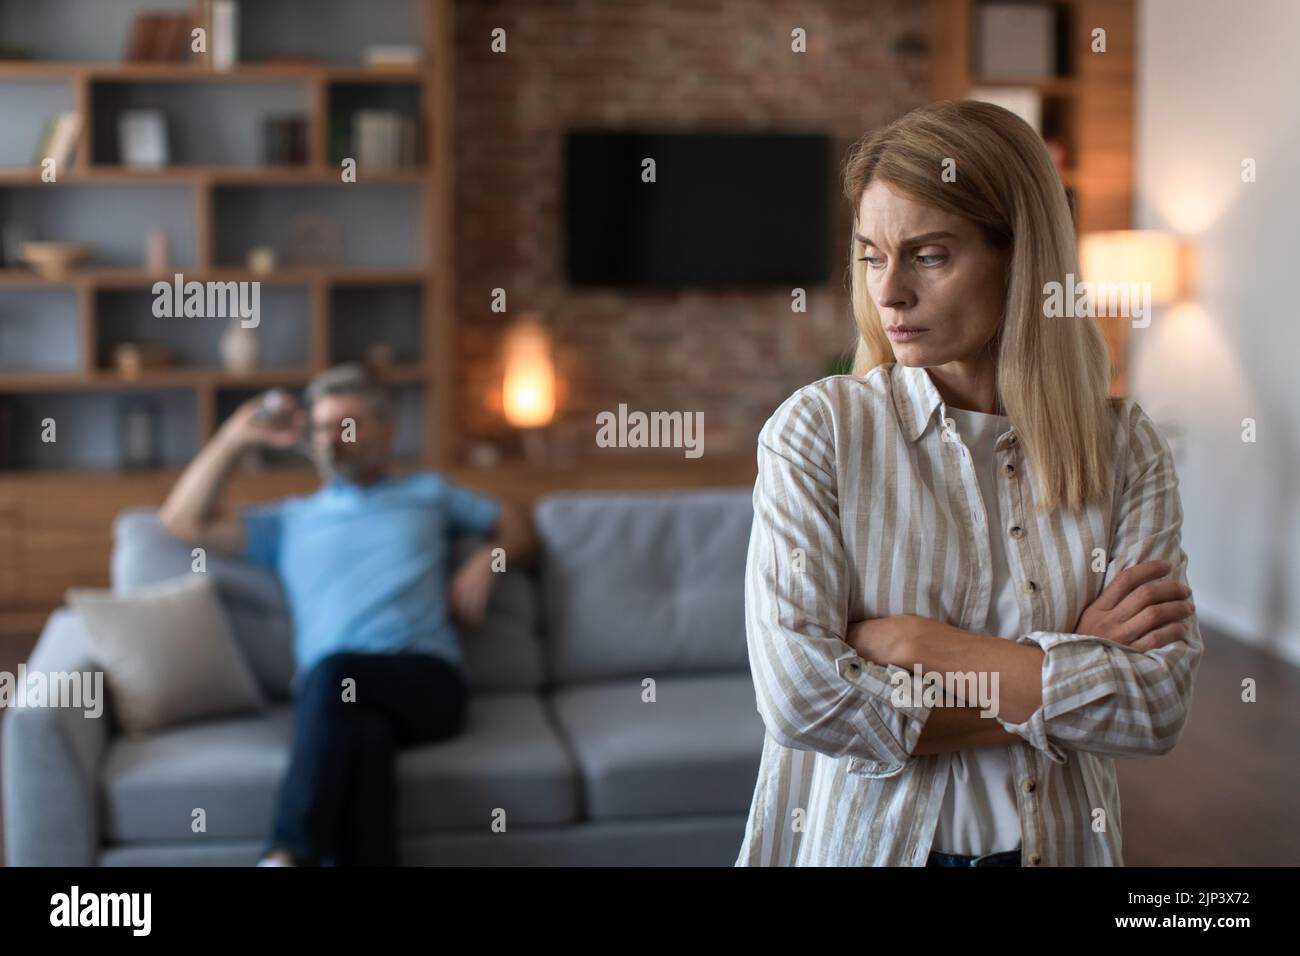 Upset offended middle aged caucasian wife ignores angry sad husband in living room interior. Conflict, stress Stock Photo